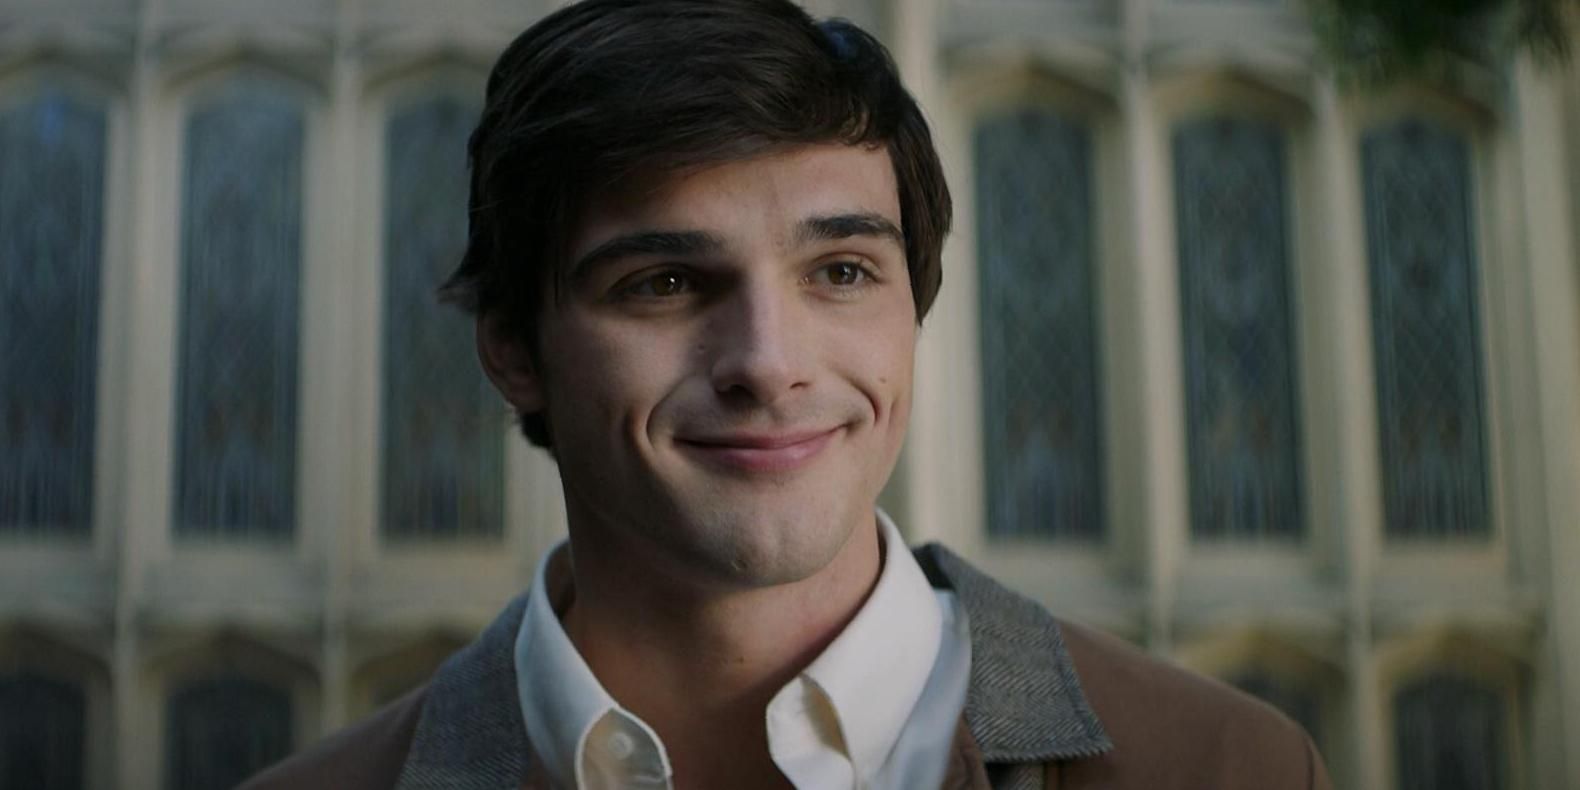 Jake (Jacob Elordi) smiling in The Mortuary Collection (2019).